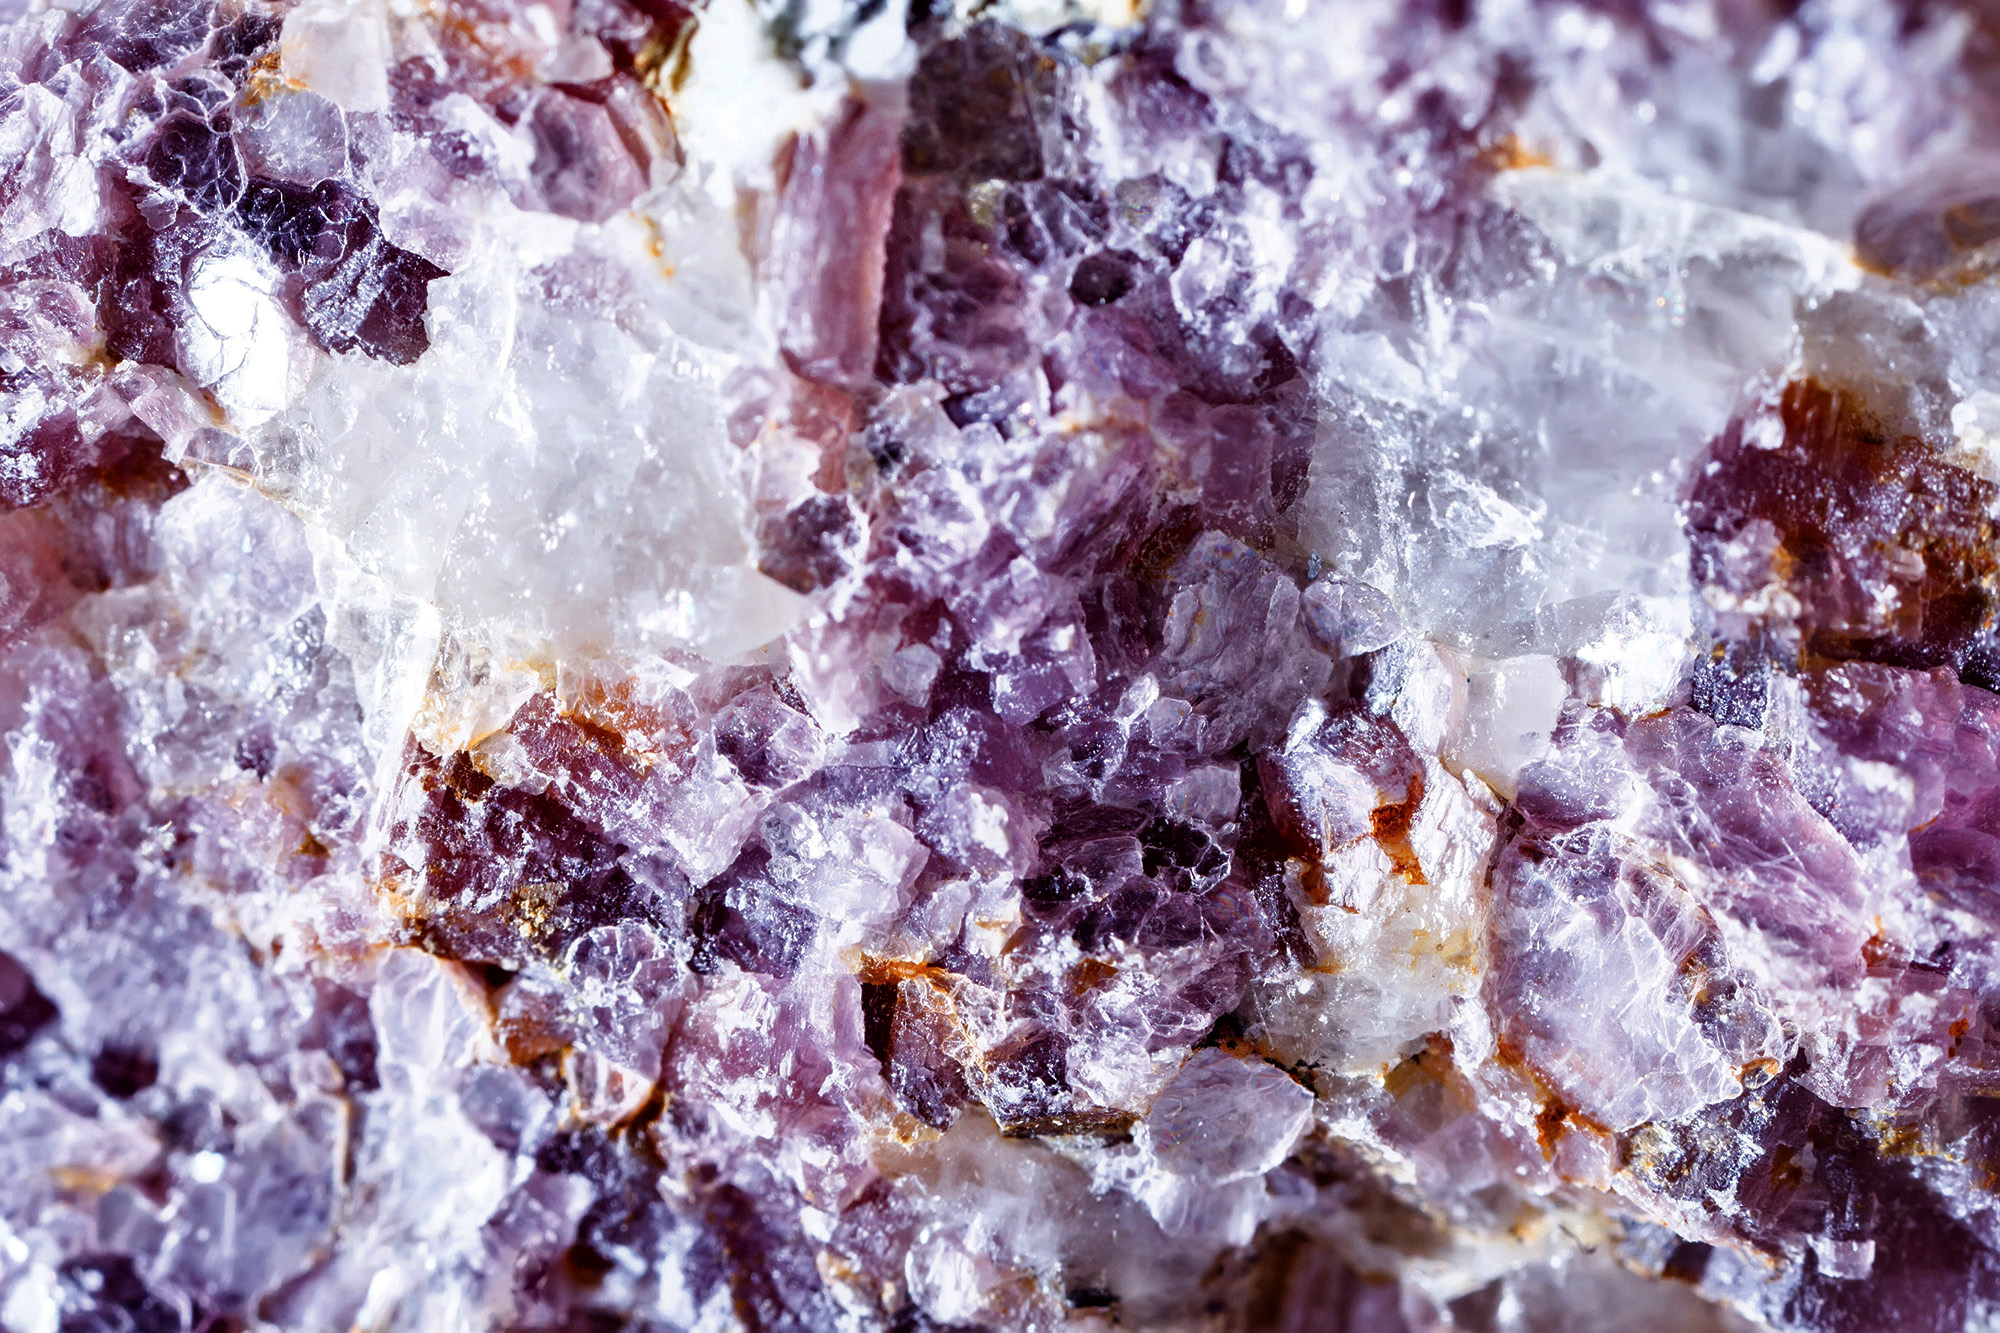 Macro shooting of natural gemstone. Raw mineral lepidolite. The texture of the stone. Abstract background.